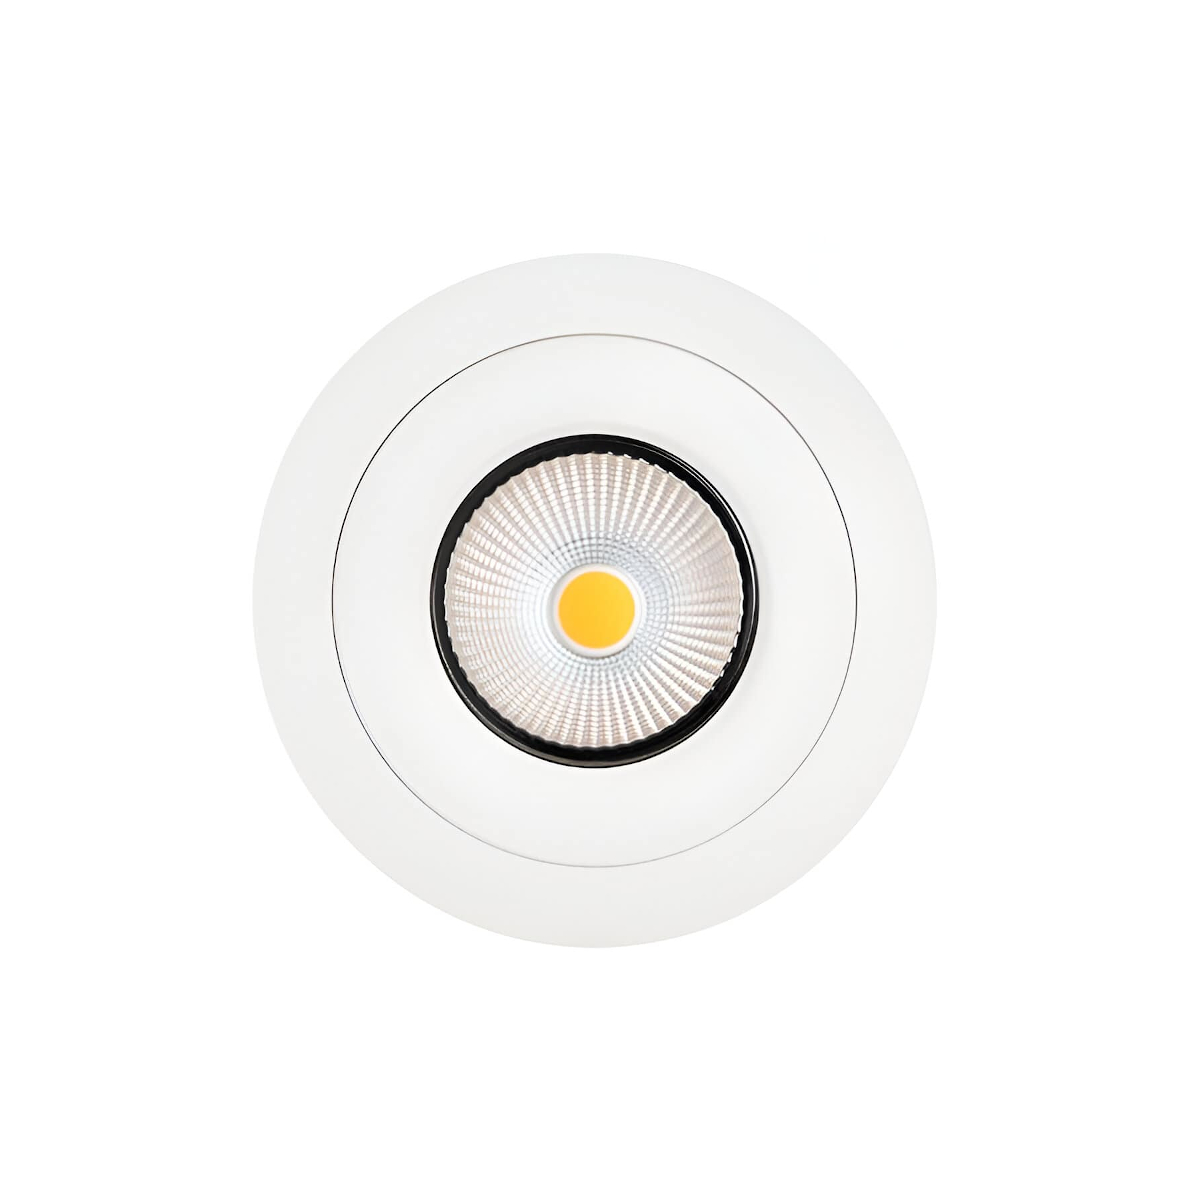 Product image of Zela round white Adapter plate with downlight inside